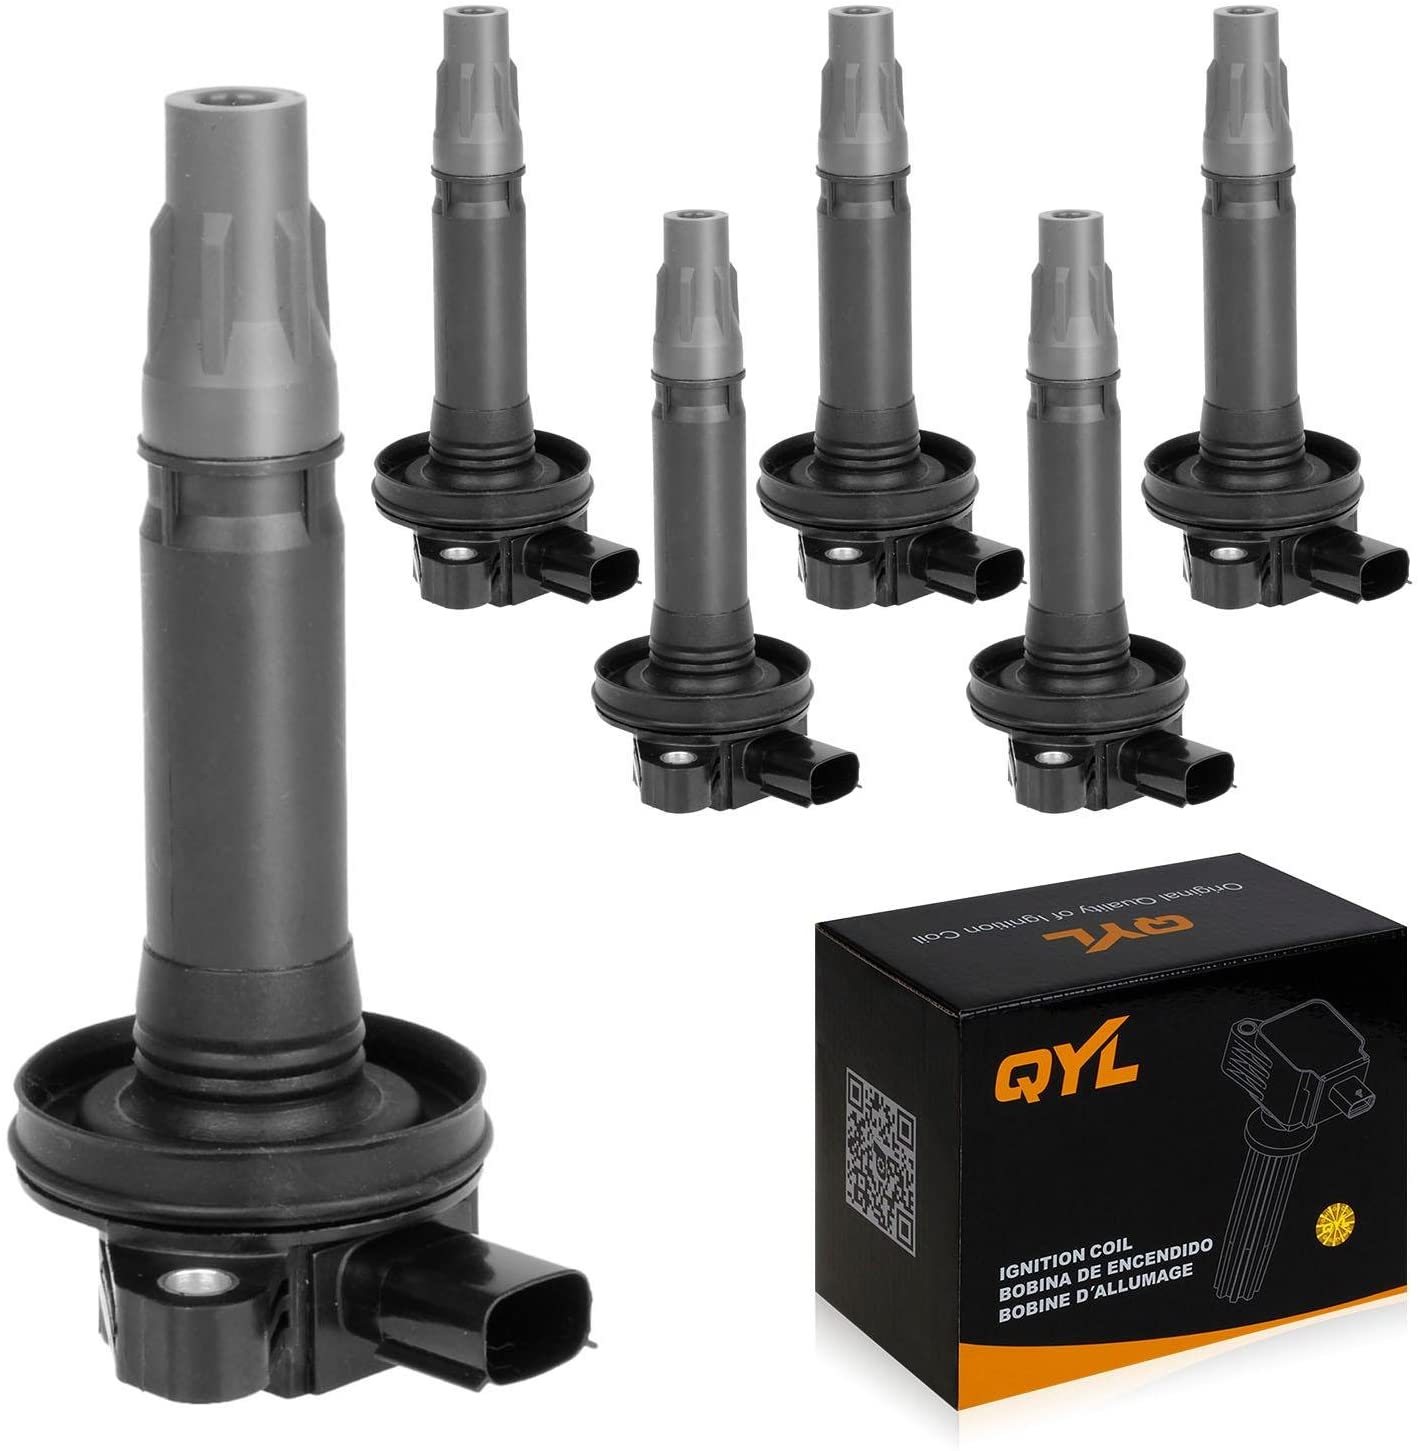 QYL 6Pcs Ignition Coil Pack Replacement for Ford Edge Flex Fusion Mustang Taurus/Lincoln MKS MKT MKK MKZ/Mazda 6 CX-9 / Mercury Sable UF-553 UF-595 5C1652 E1053